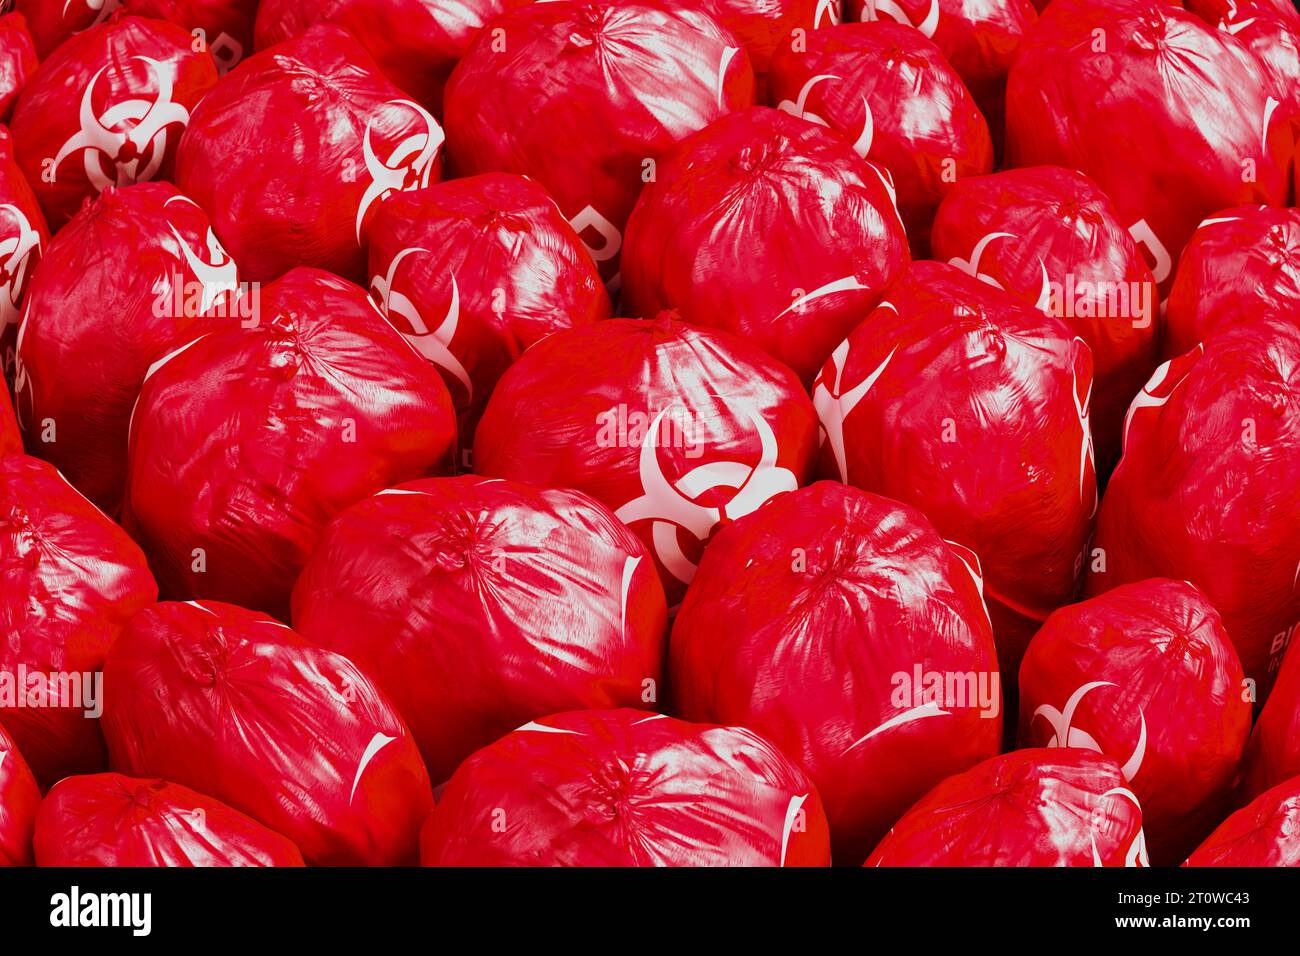 Picture of the countless red biohazard trash bags full of dangerous waste. Medical, biomedical of infectious solid or non-sharp waste disposal. Waste Stock Photo